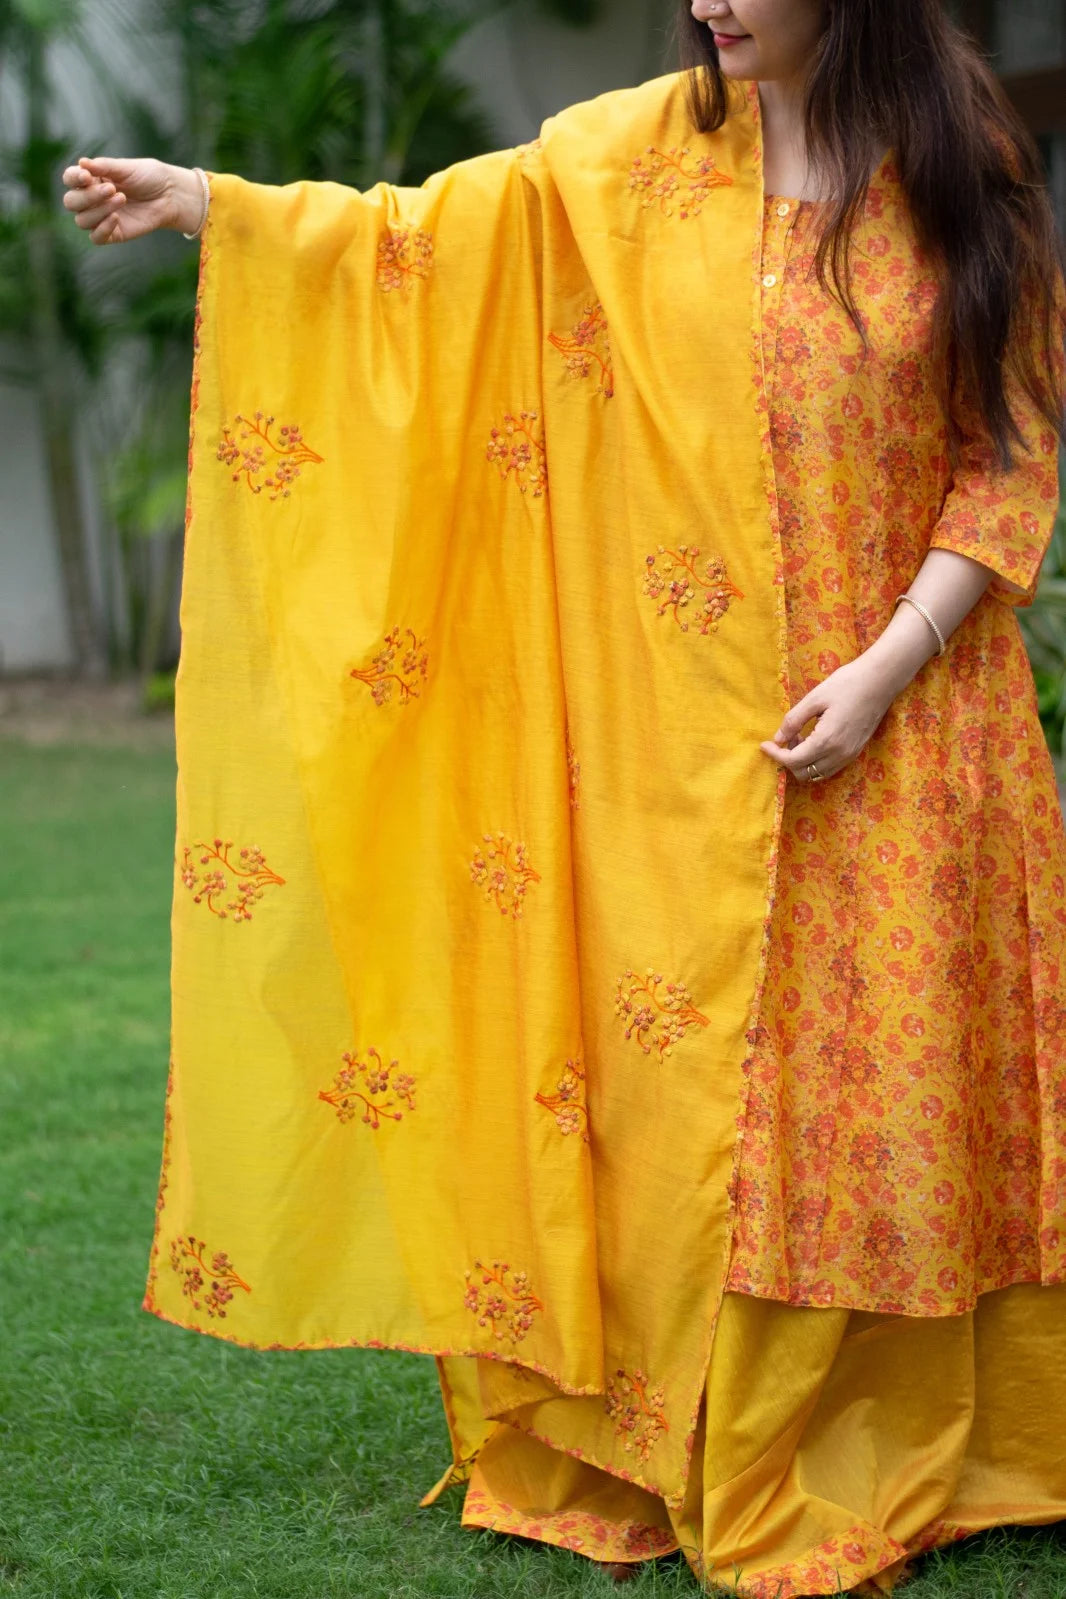 Traditional yet chic: Woman poses in a yellow Chanderi Kurta.